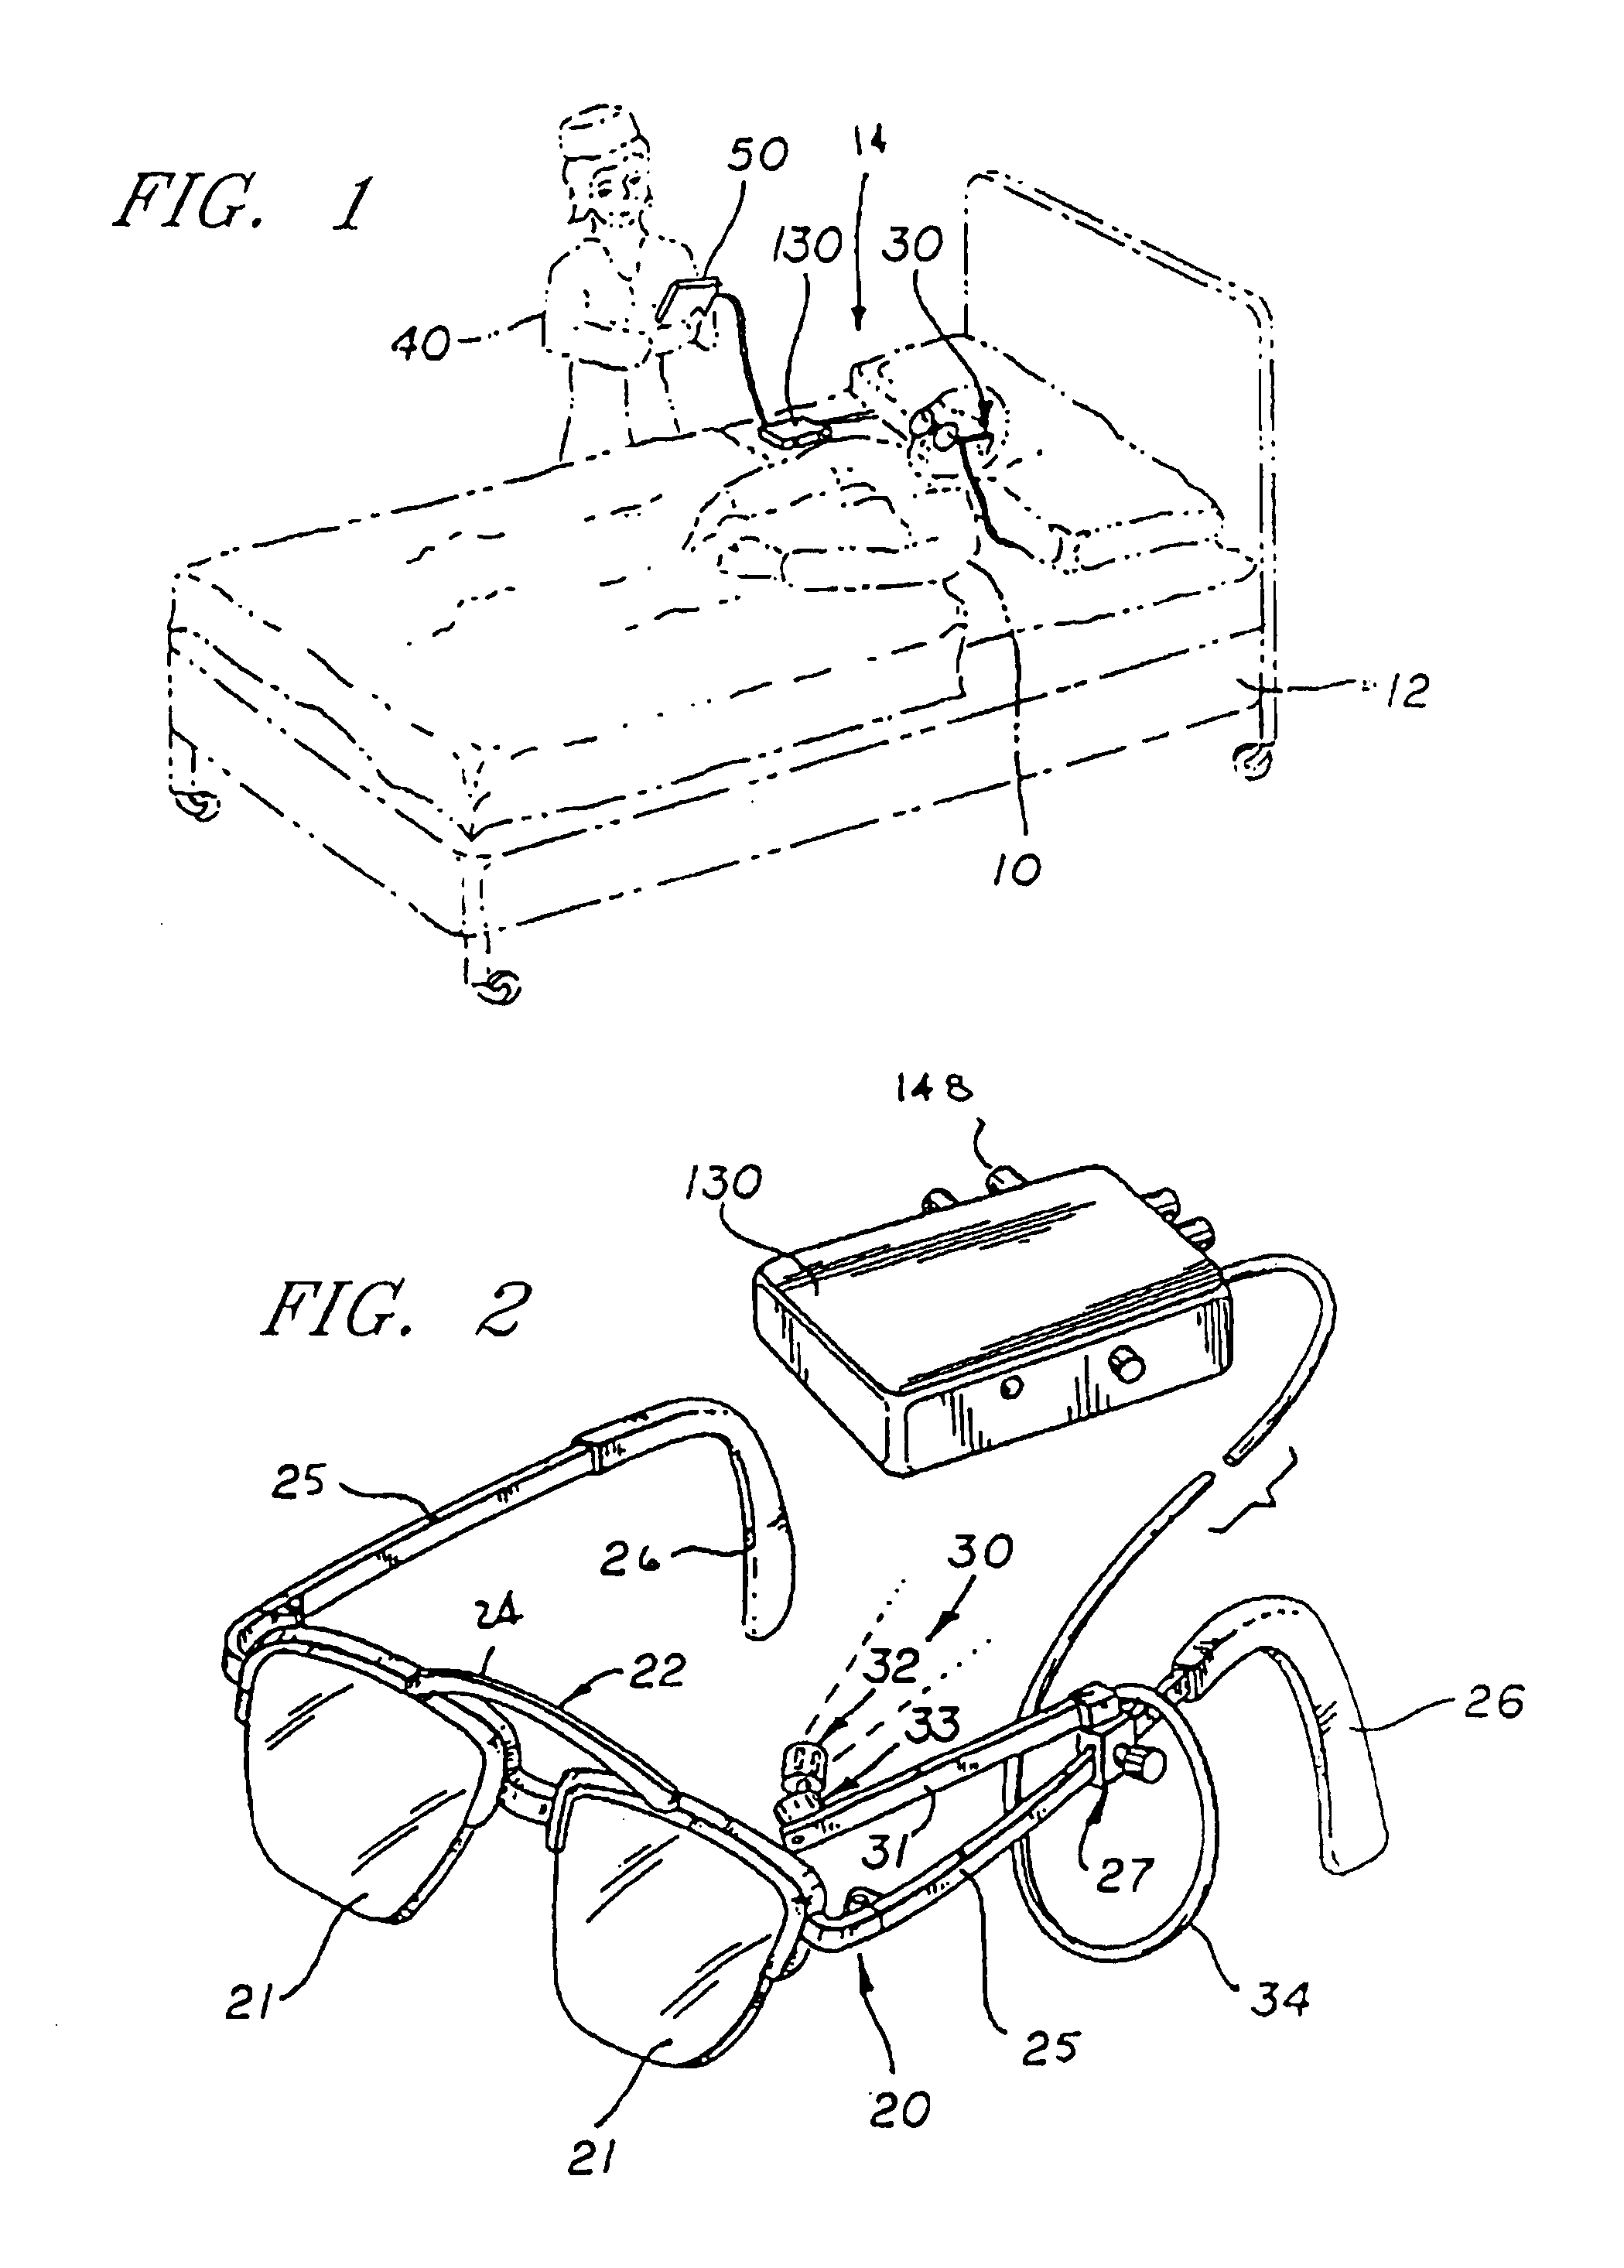 System and method for monitoring eye movement